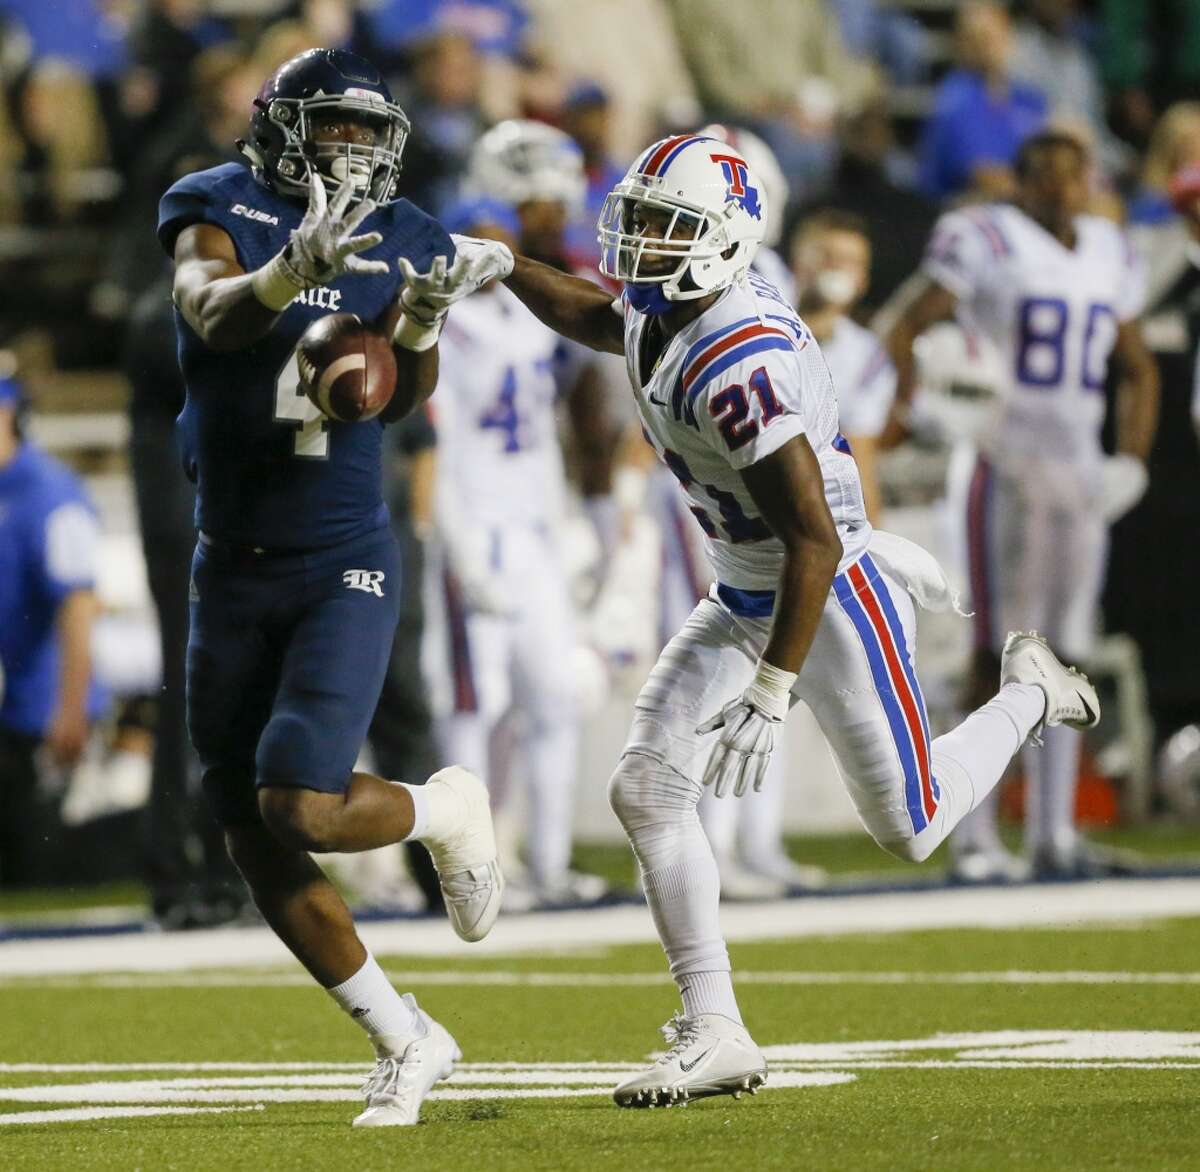 Rice Owls wide receiver Dennis Parks (4) has the ball go through his hands as he gets behind Louisiana Tech Bulldogs cornerback Adairius Barnes (21) during a NCAA Conference USA football game Friday, Oct. 30, 2015. (Bob Levey/For The Chronicle)